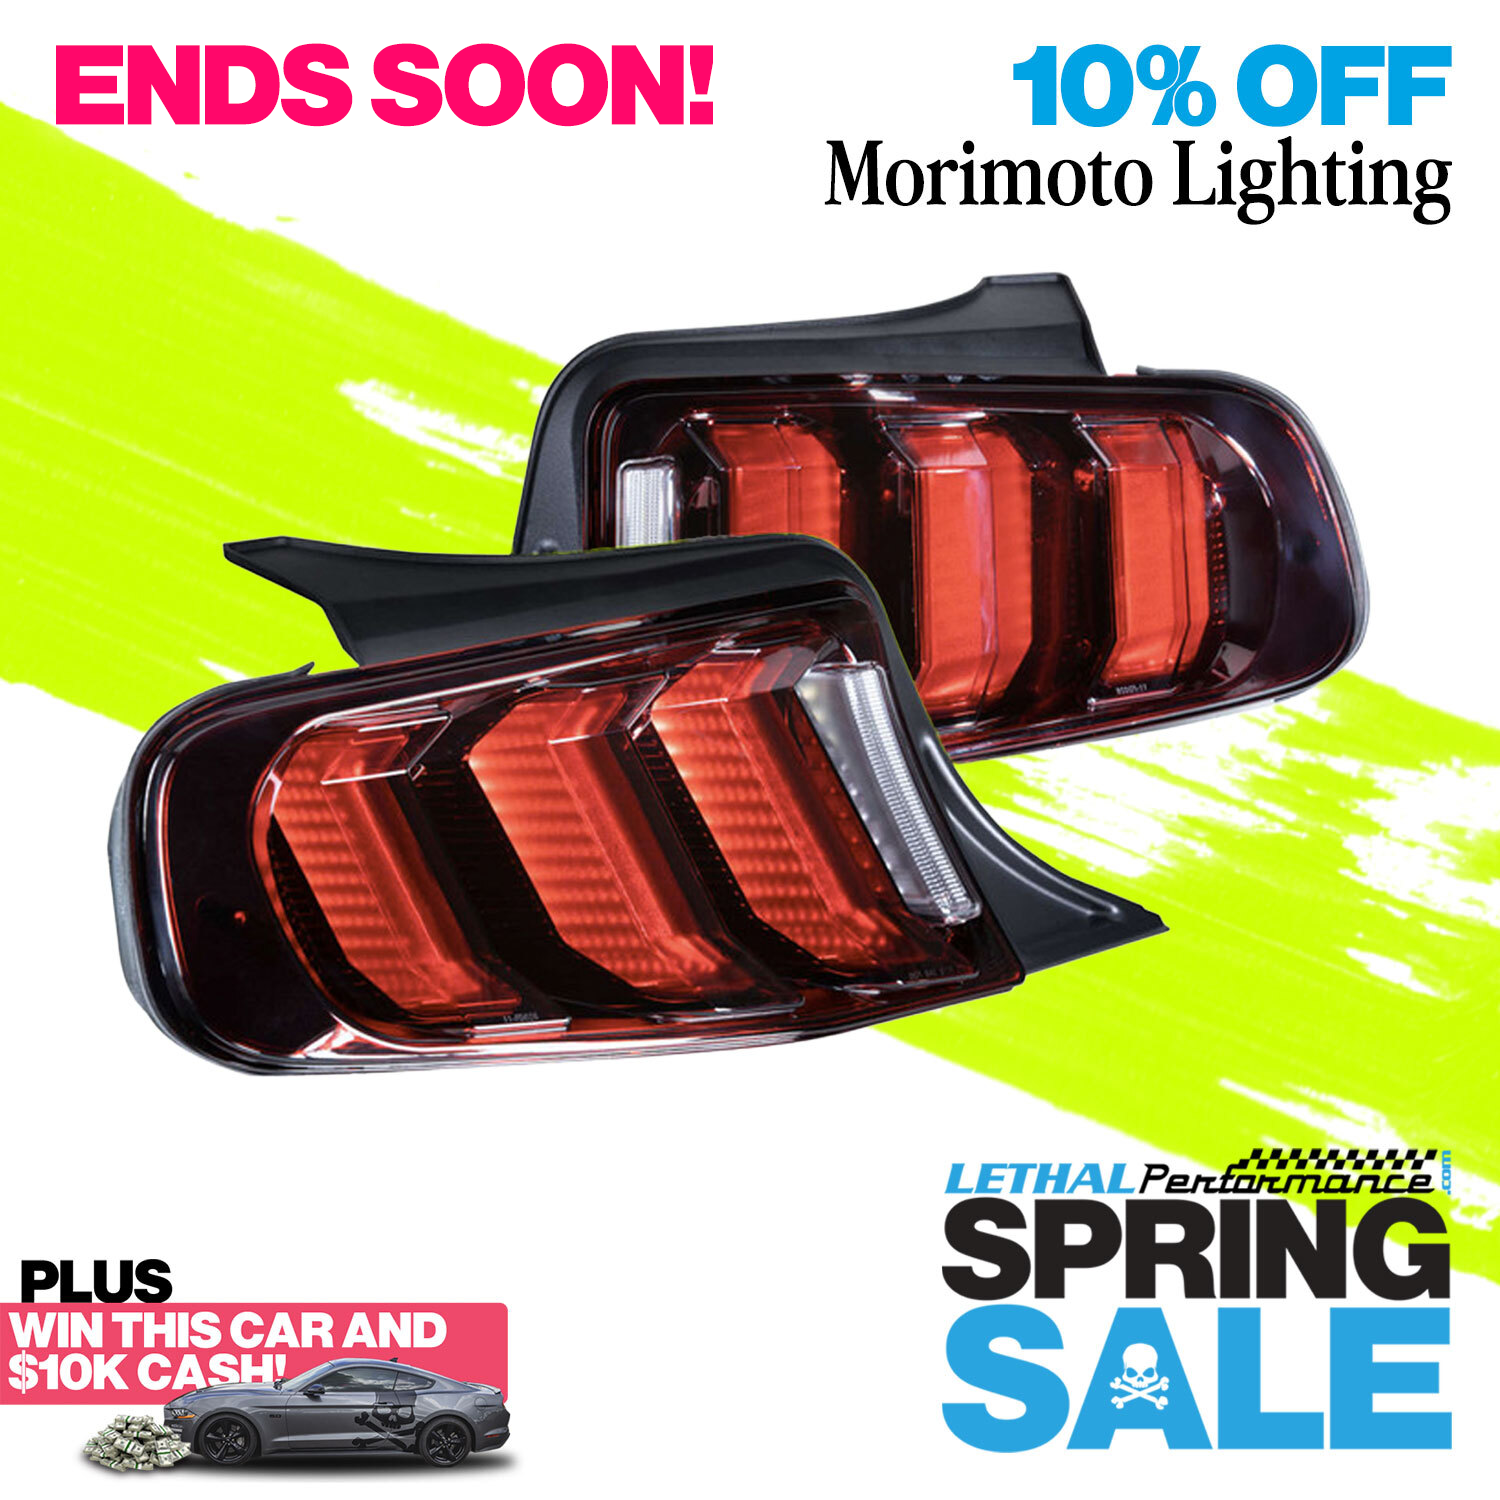 mori msuatng end soon spring sale.png